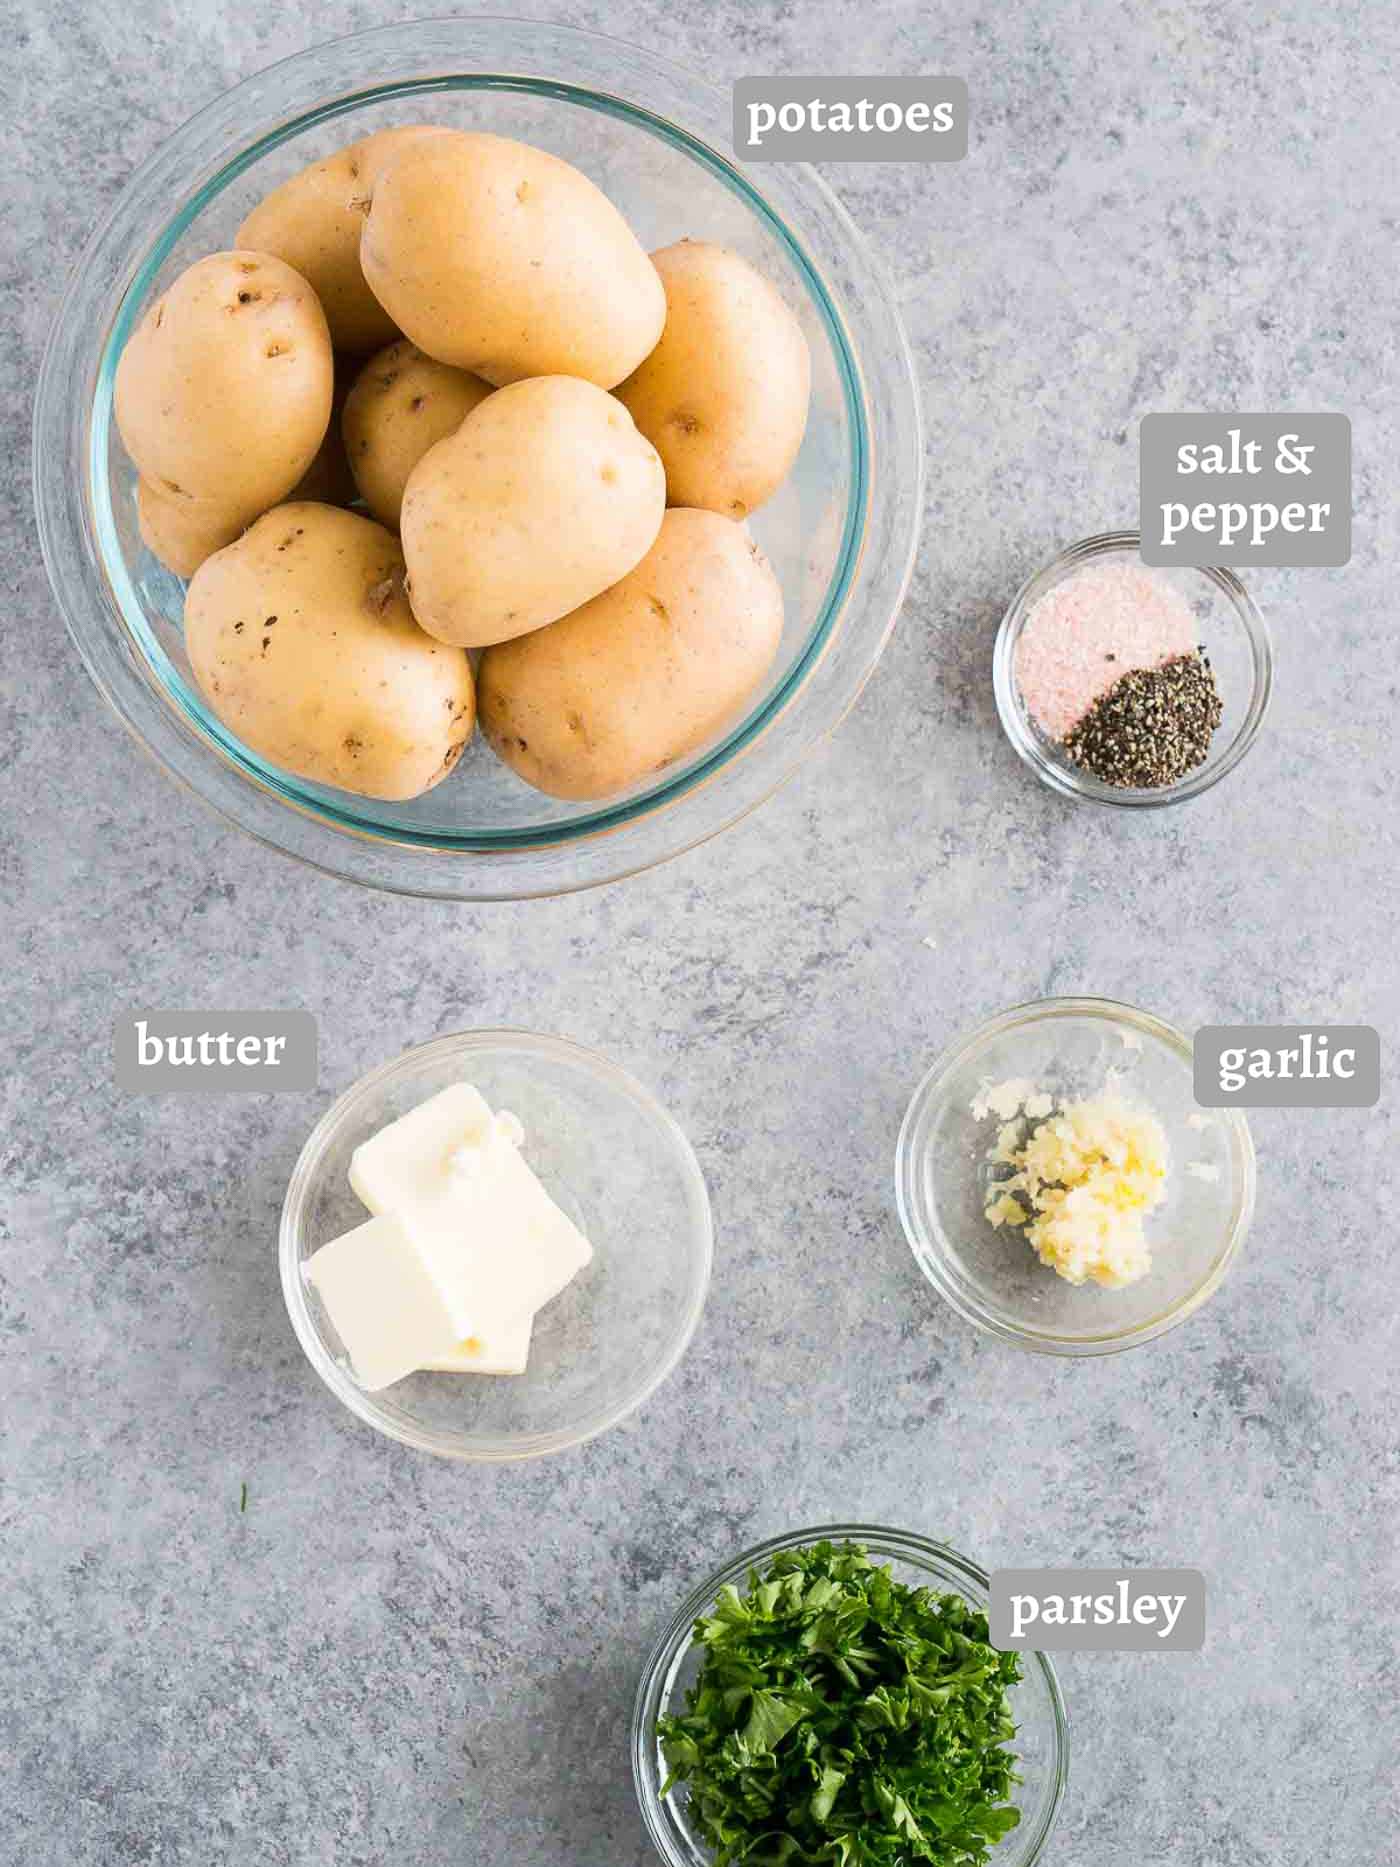 ingredients for boiled potatoes